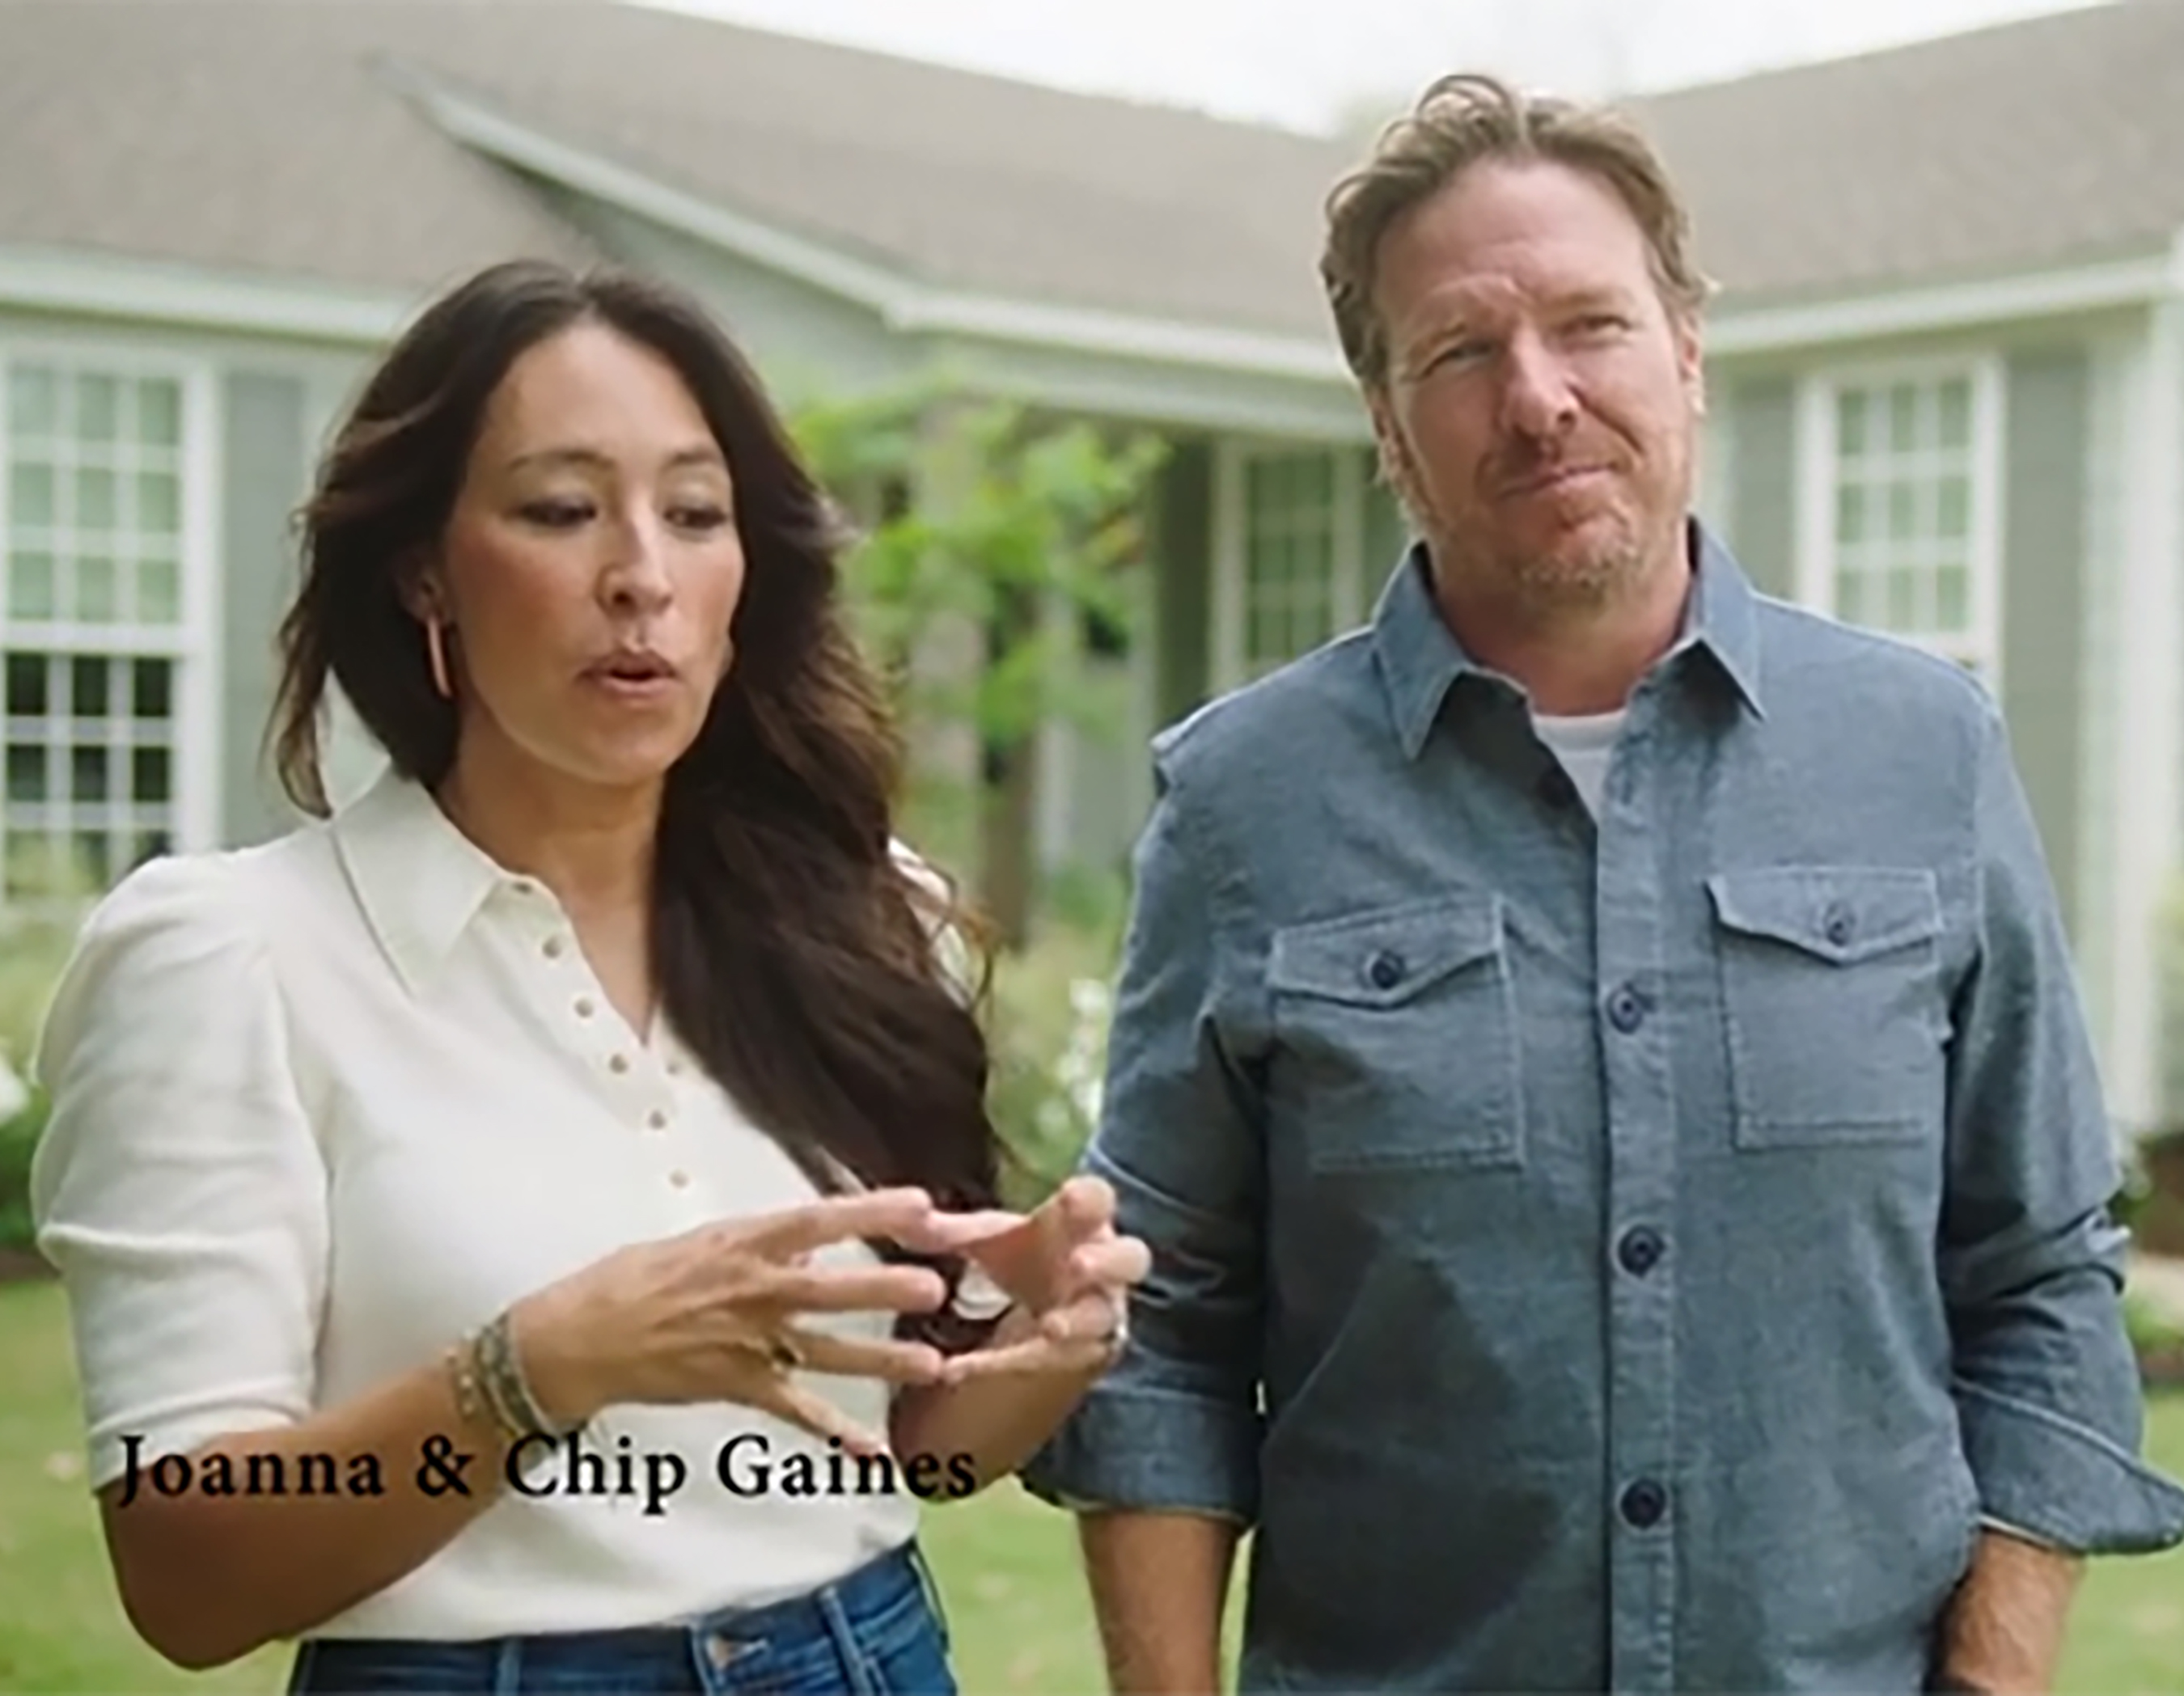 For Chip and Joanna Gaines, working with James Hardie to create a collection of beautiful home exterior products was a no brainer.